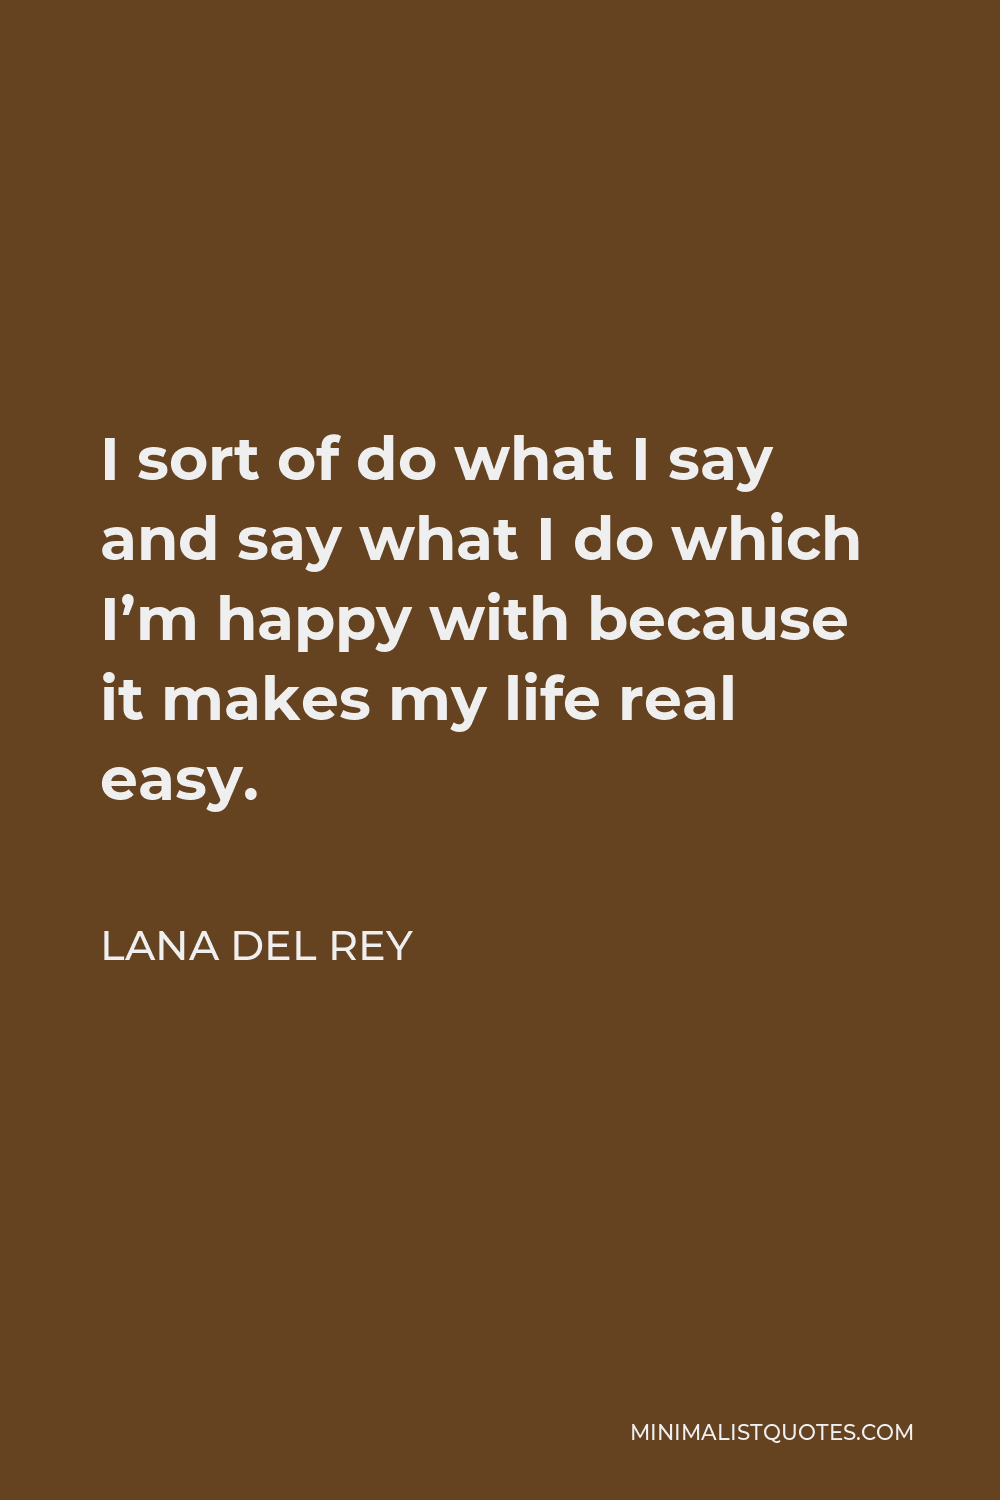 Lana Del Rey Quote - I sort of do what I say and say what I do which I’m happy with because it makes my life real easy.